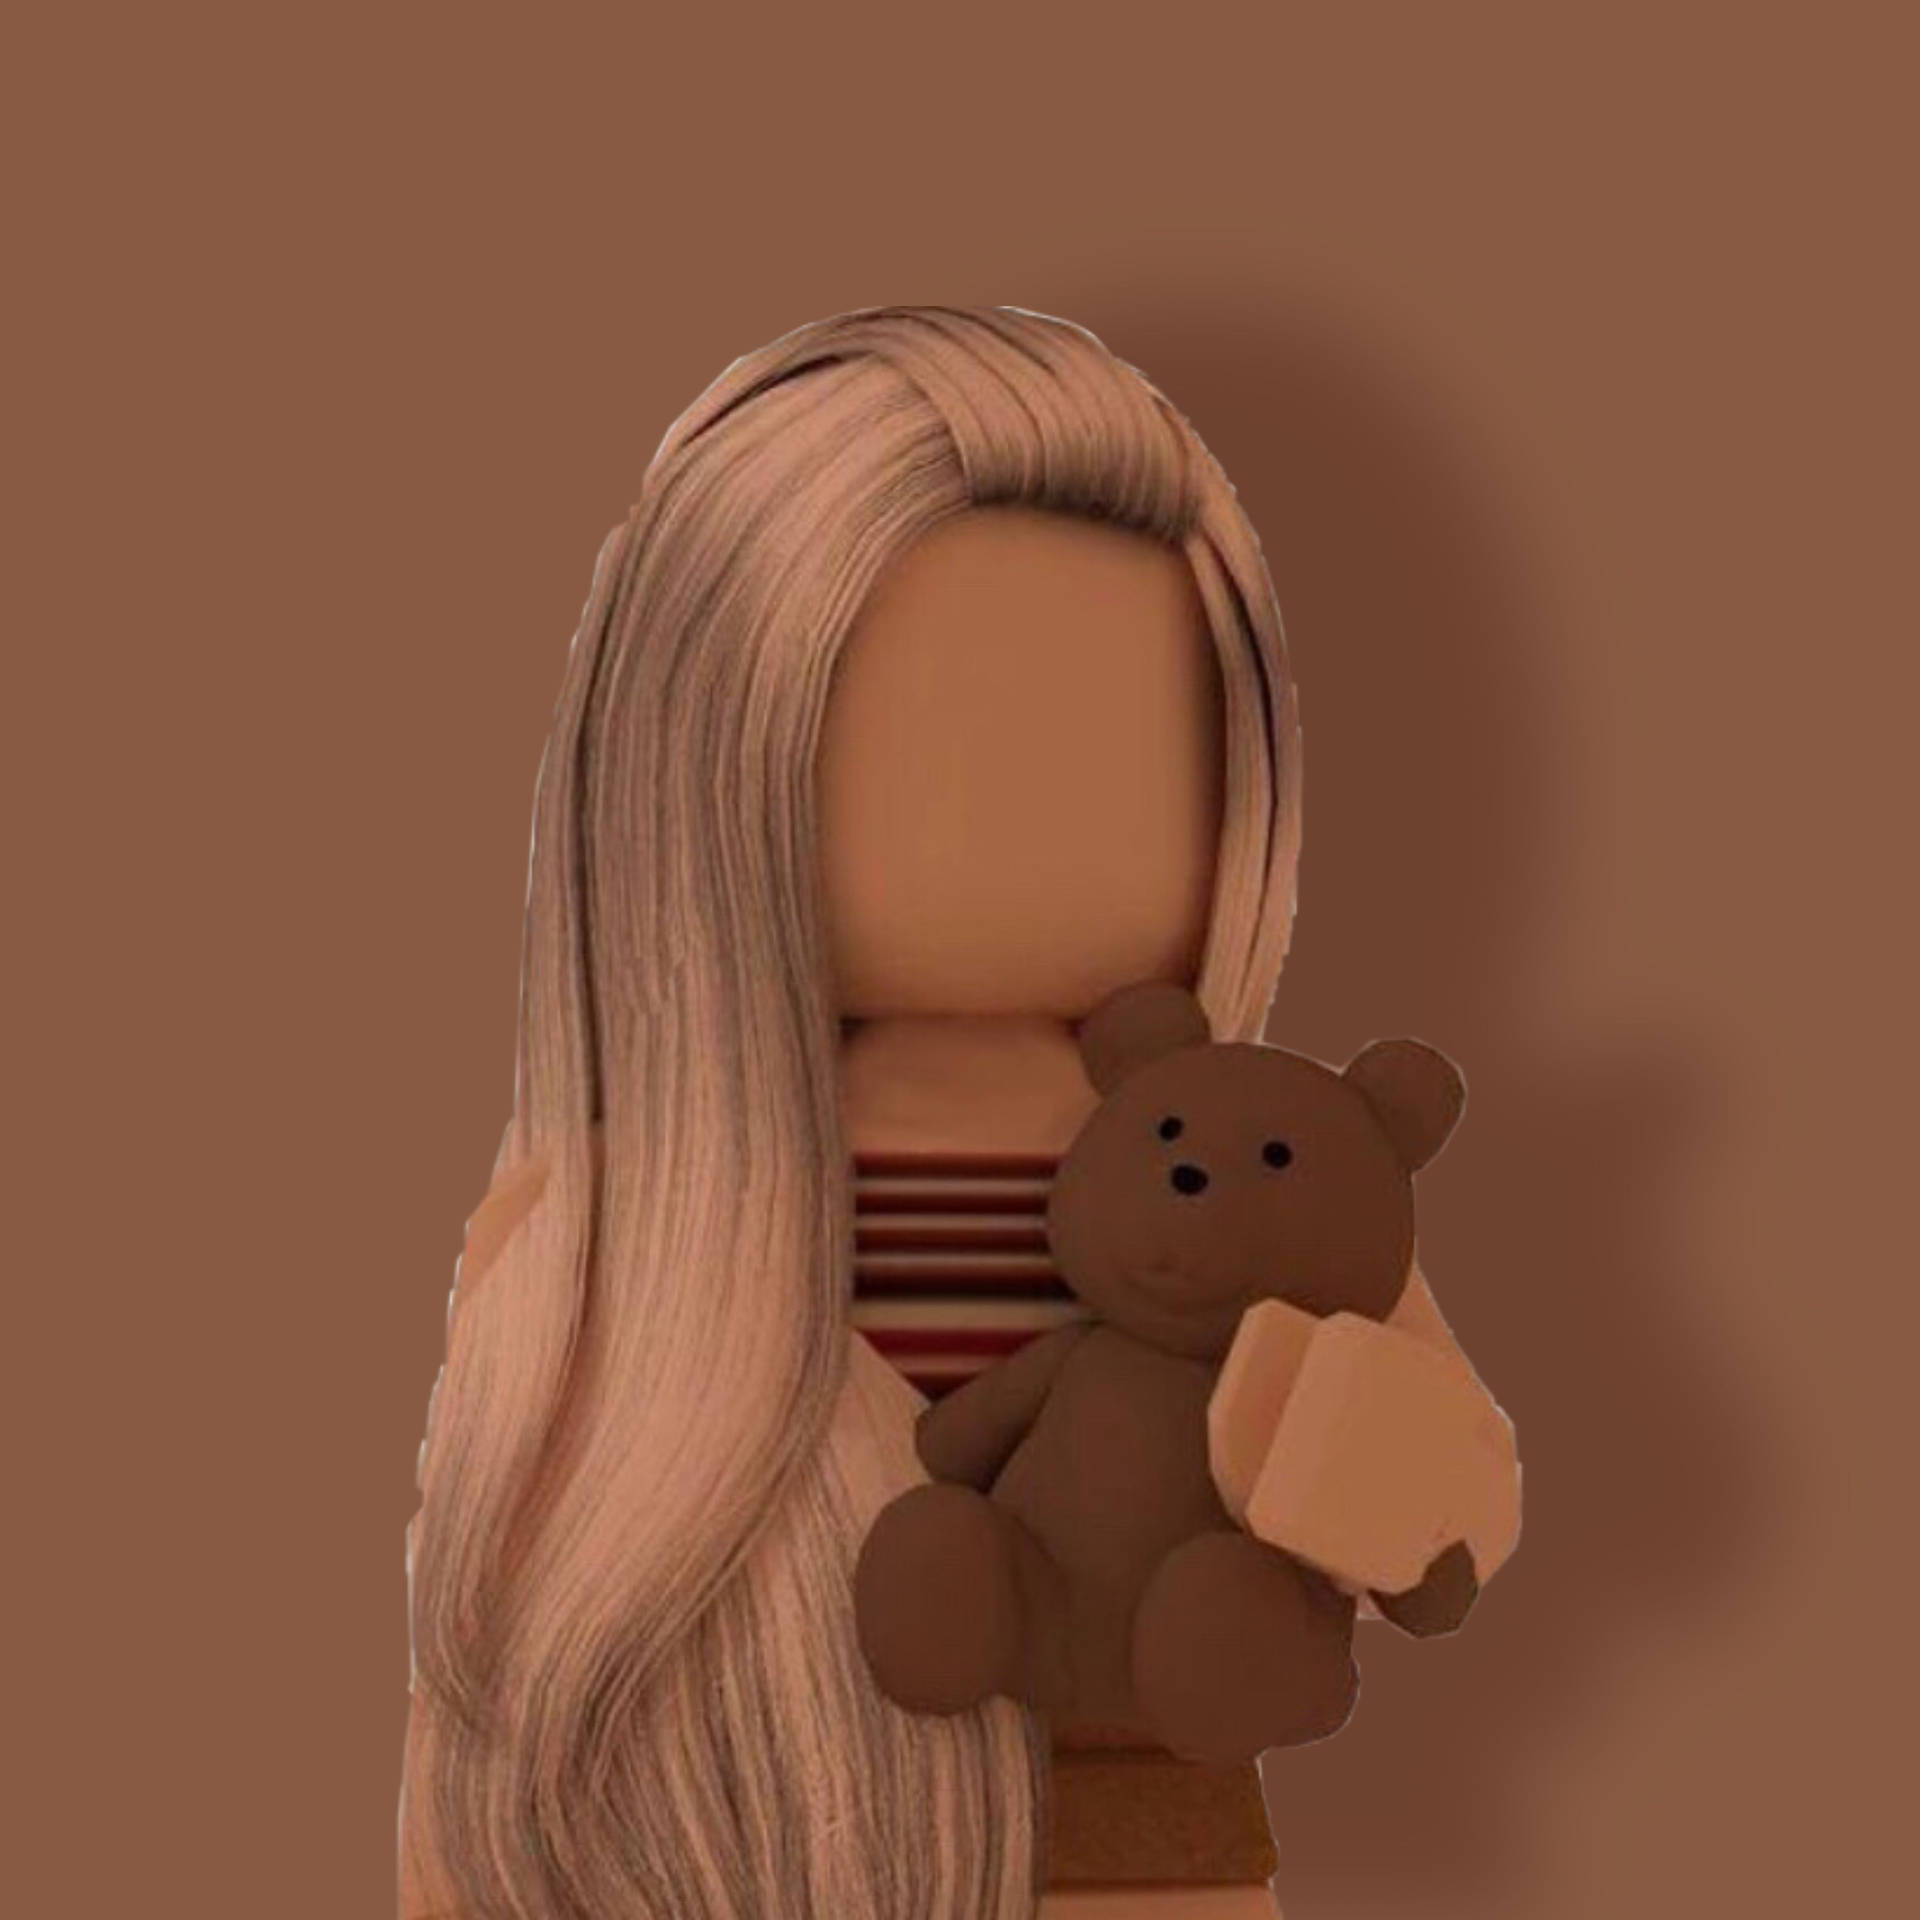 Aesthetic Roblox Girl With Brown Teddy Bear